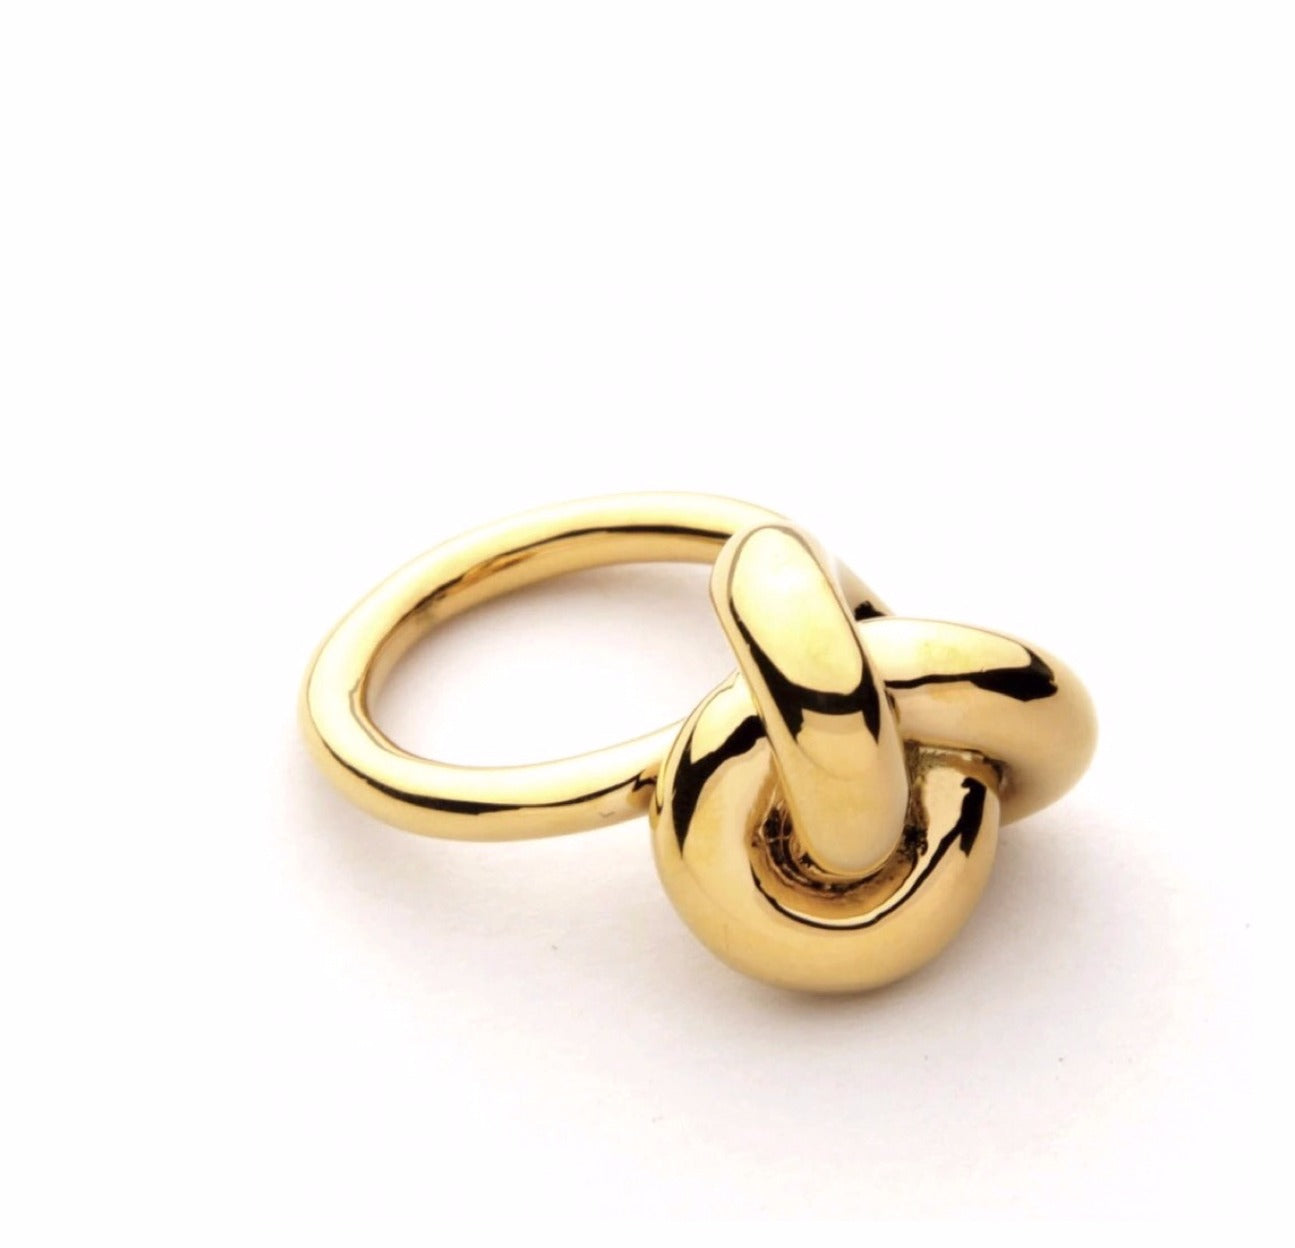 KNOTTY | 18K Gold Stainless Steel Oversized Thick Knot Ring